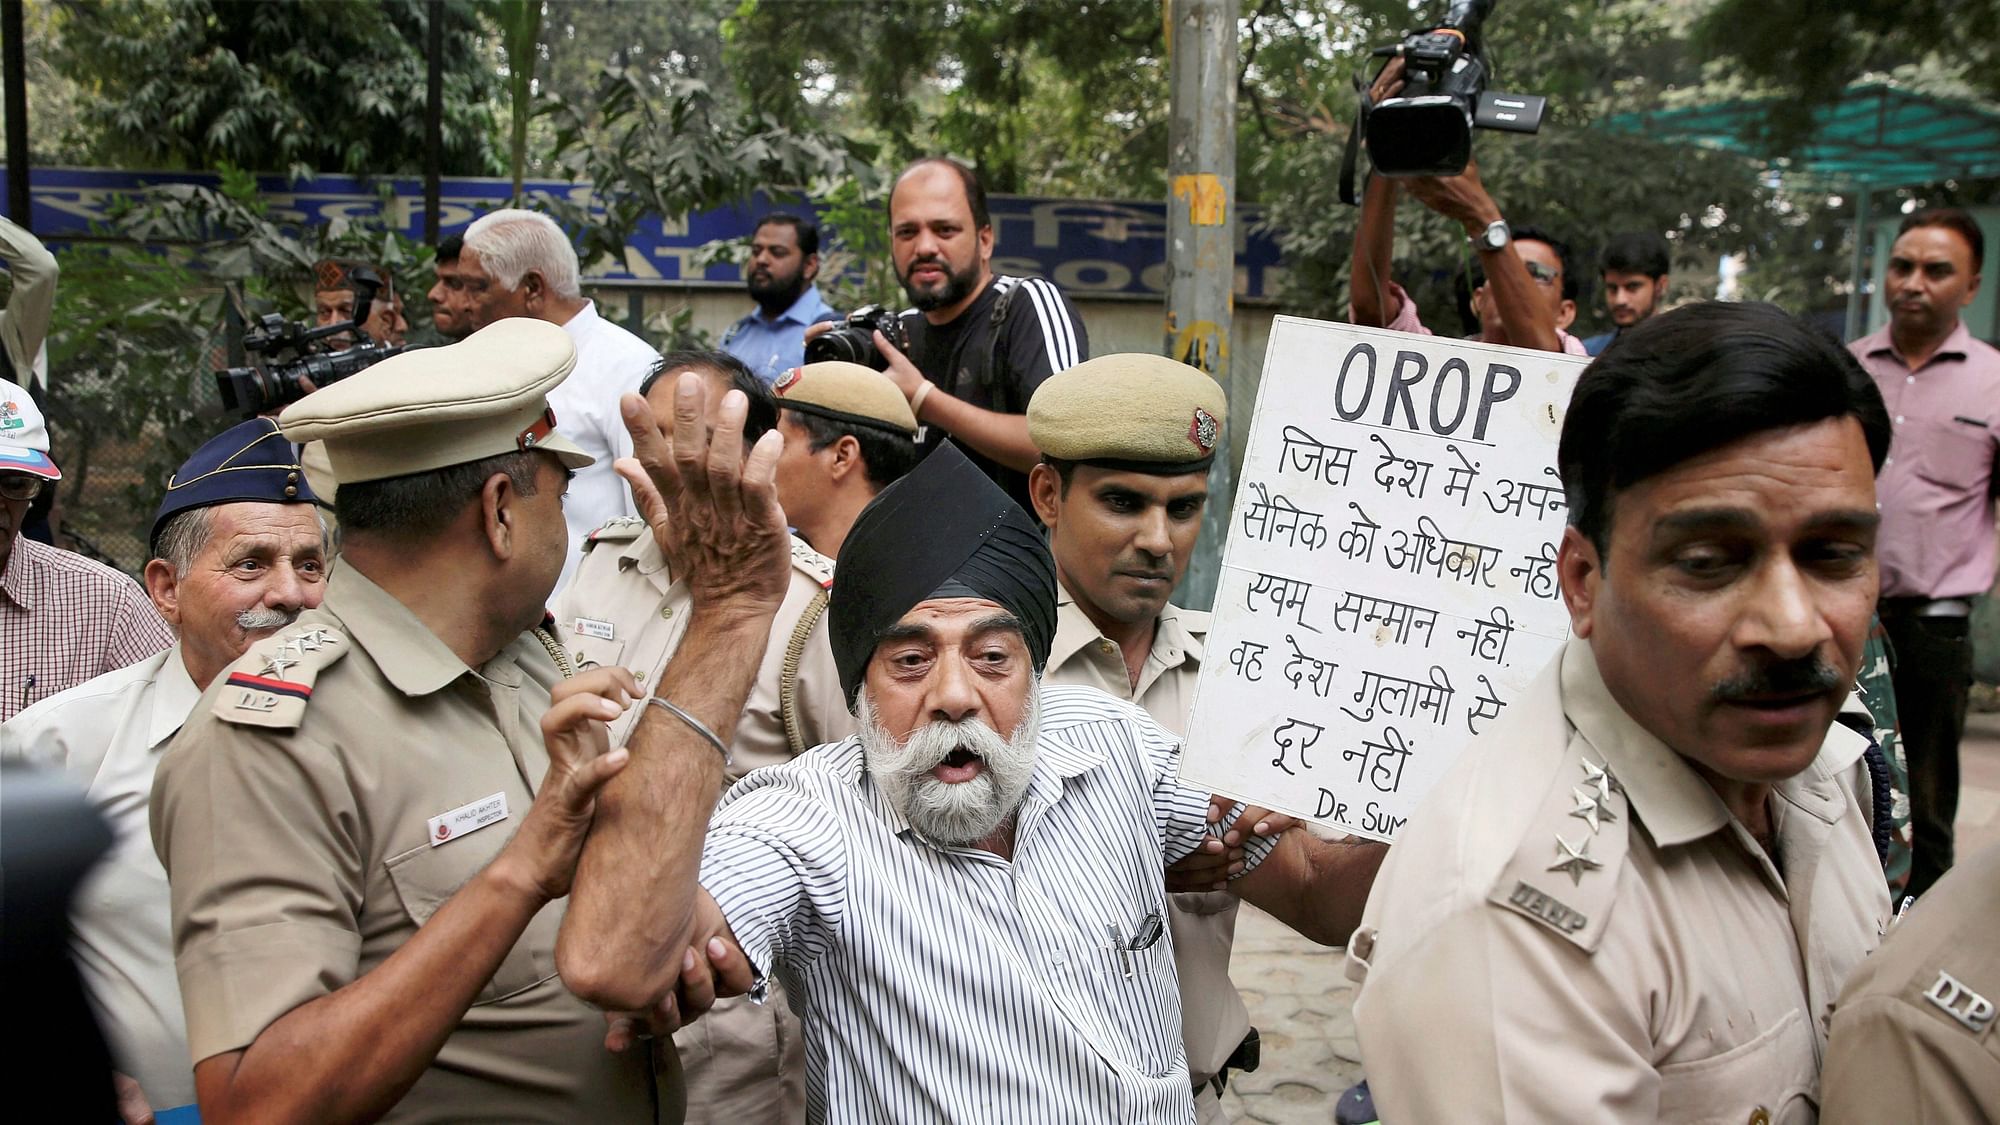  Police evicting ex-servicemen from Jantar Mantar following an NGT order banning protests and dharnas around the historic monument, in New Delhi on Monday, 30 October.&nbsp;